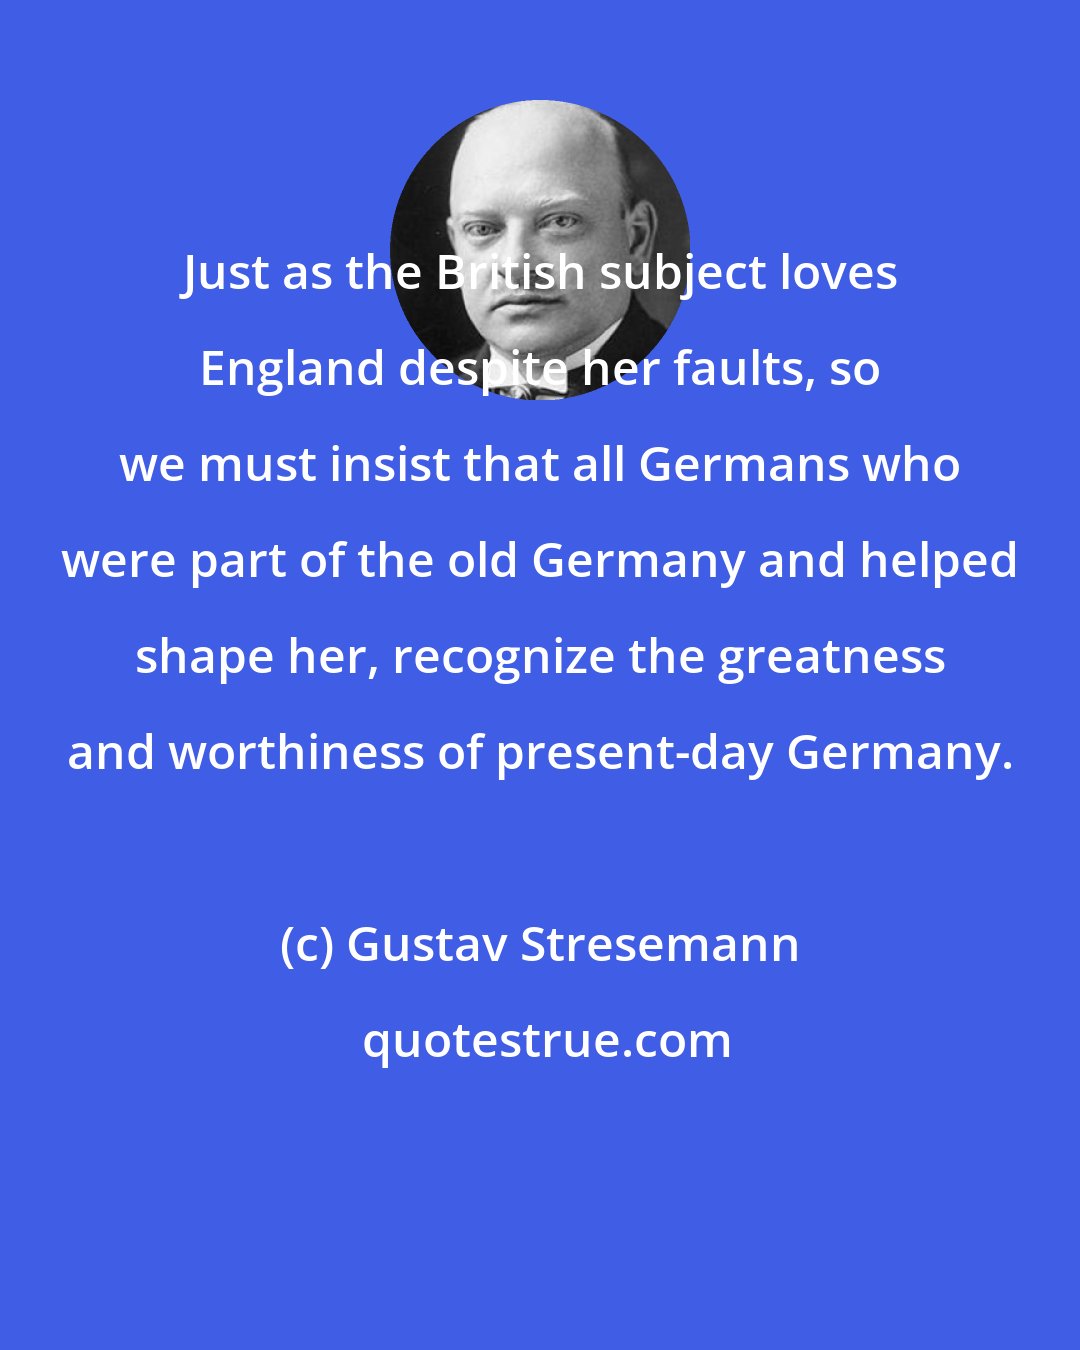 Gustav Stresemann: Just as the British subject loves England despite her faults, so we must insist that all Germans who were part of the old Germany and helped shape her, recognize the greatness and worthiness of present-day Germany.